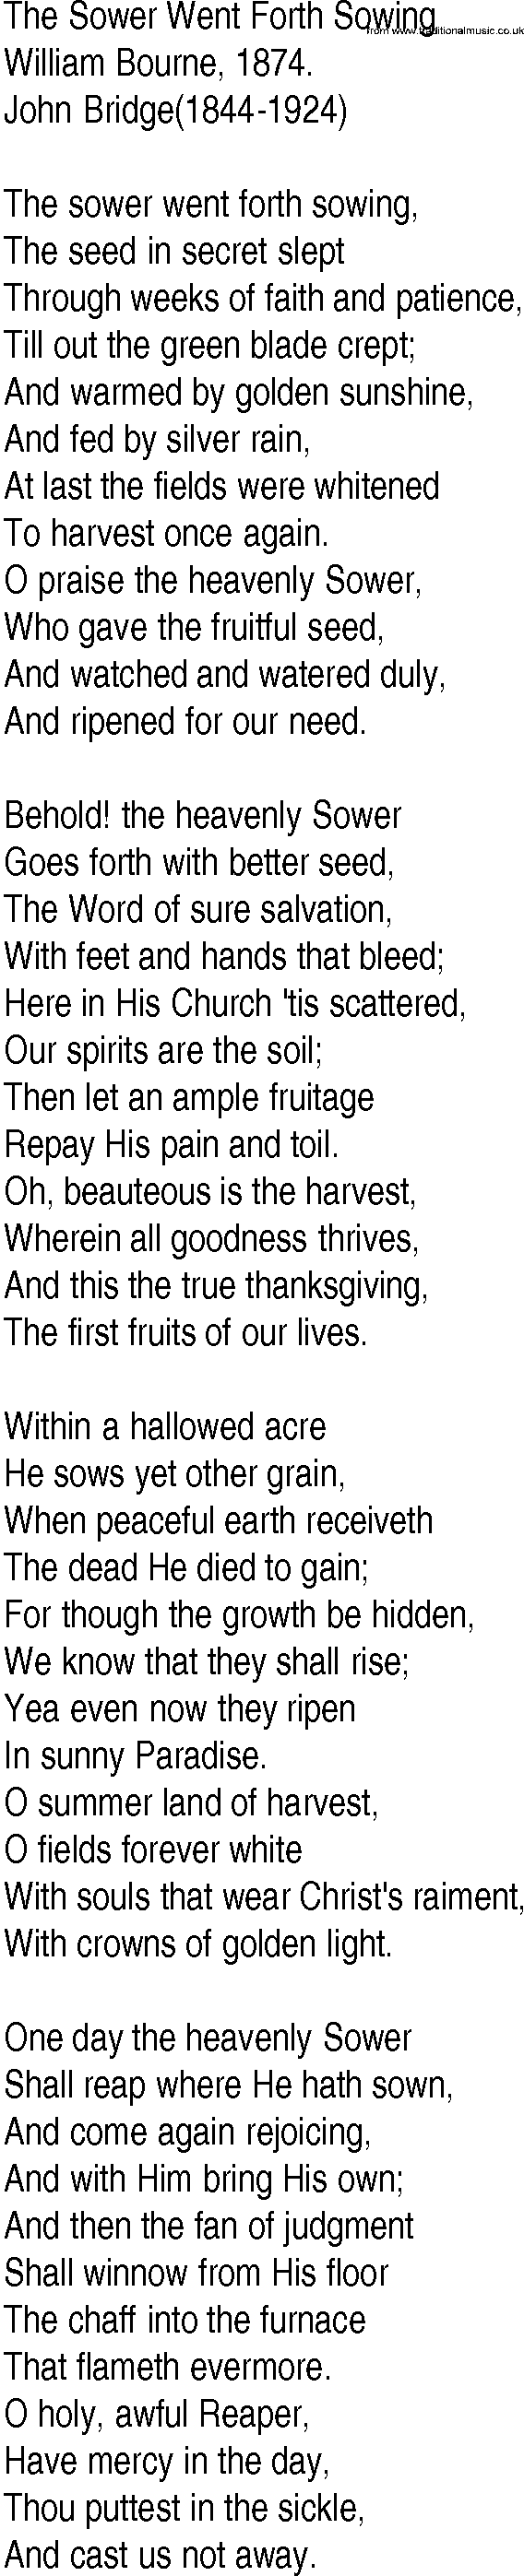 Hymn and Gospel Song: The Sower Went Forth Sowing by William Bourne lyrics